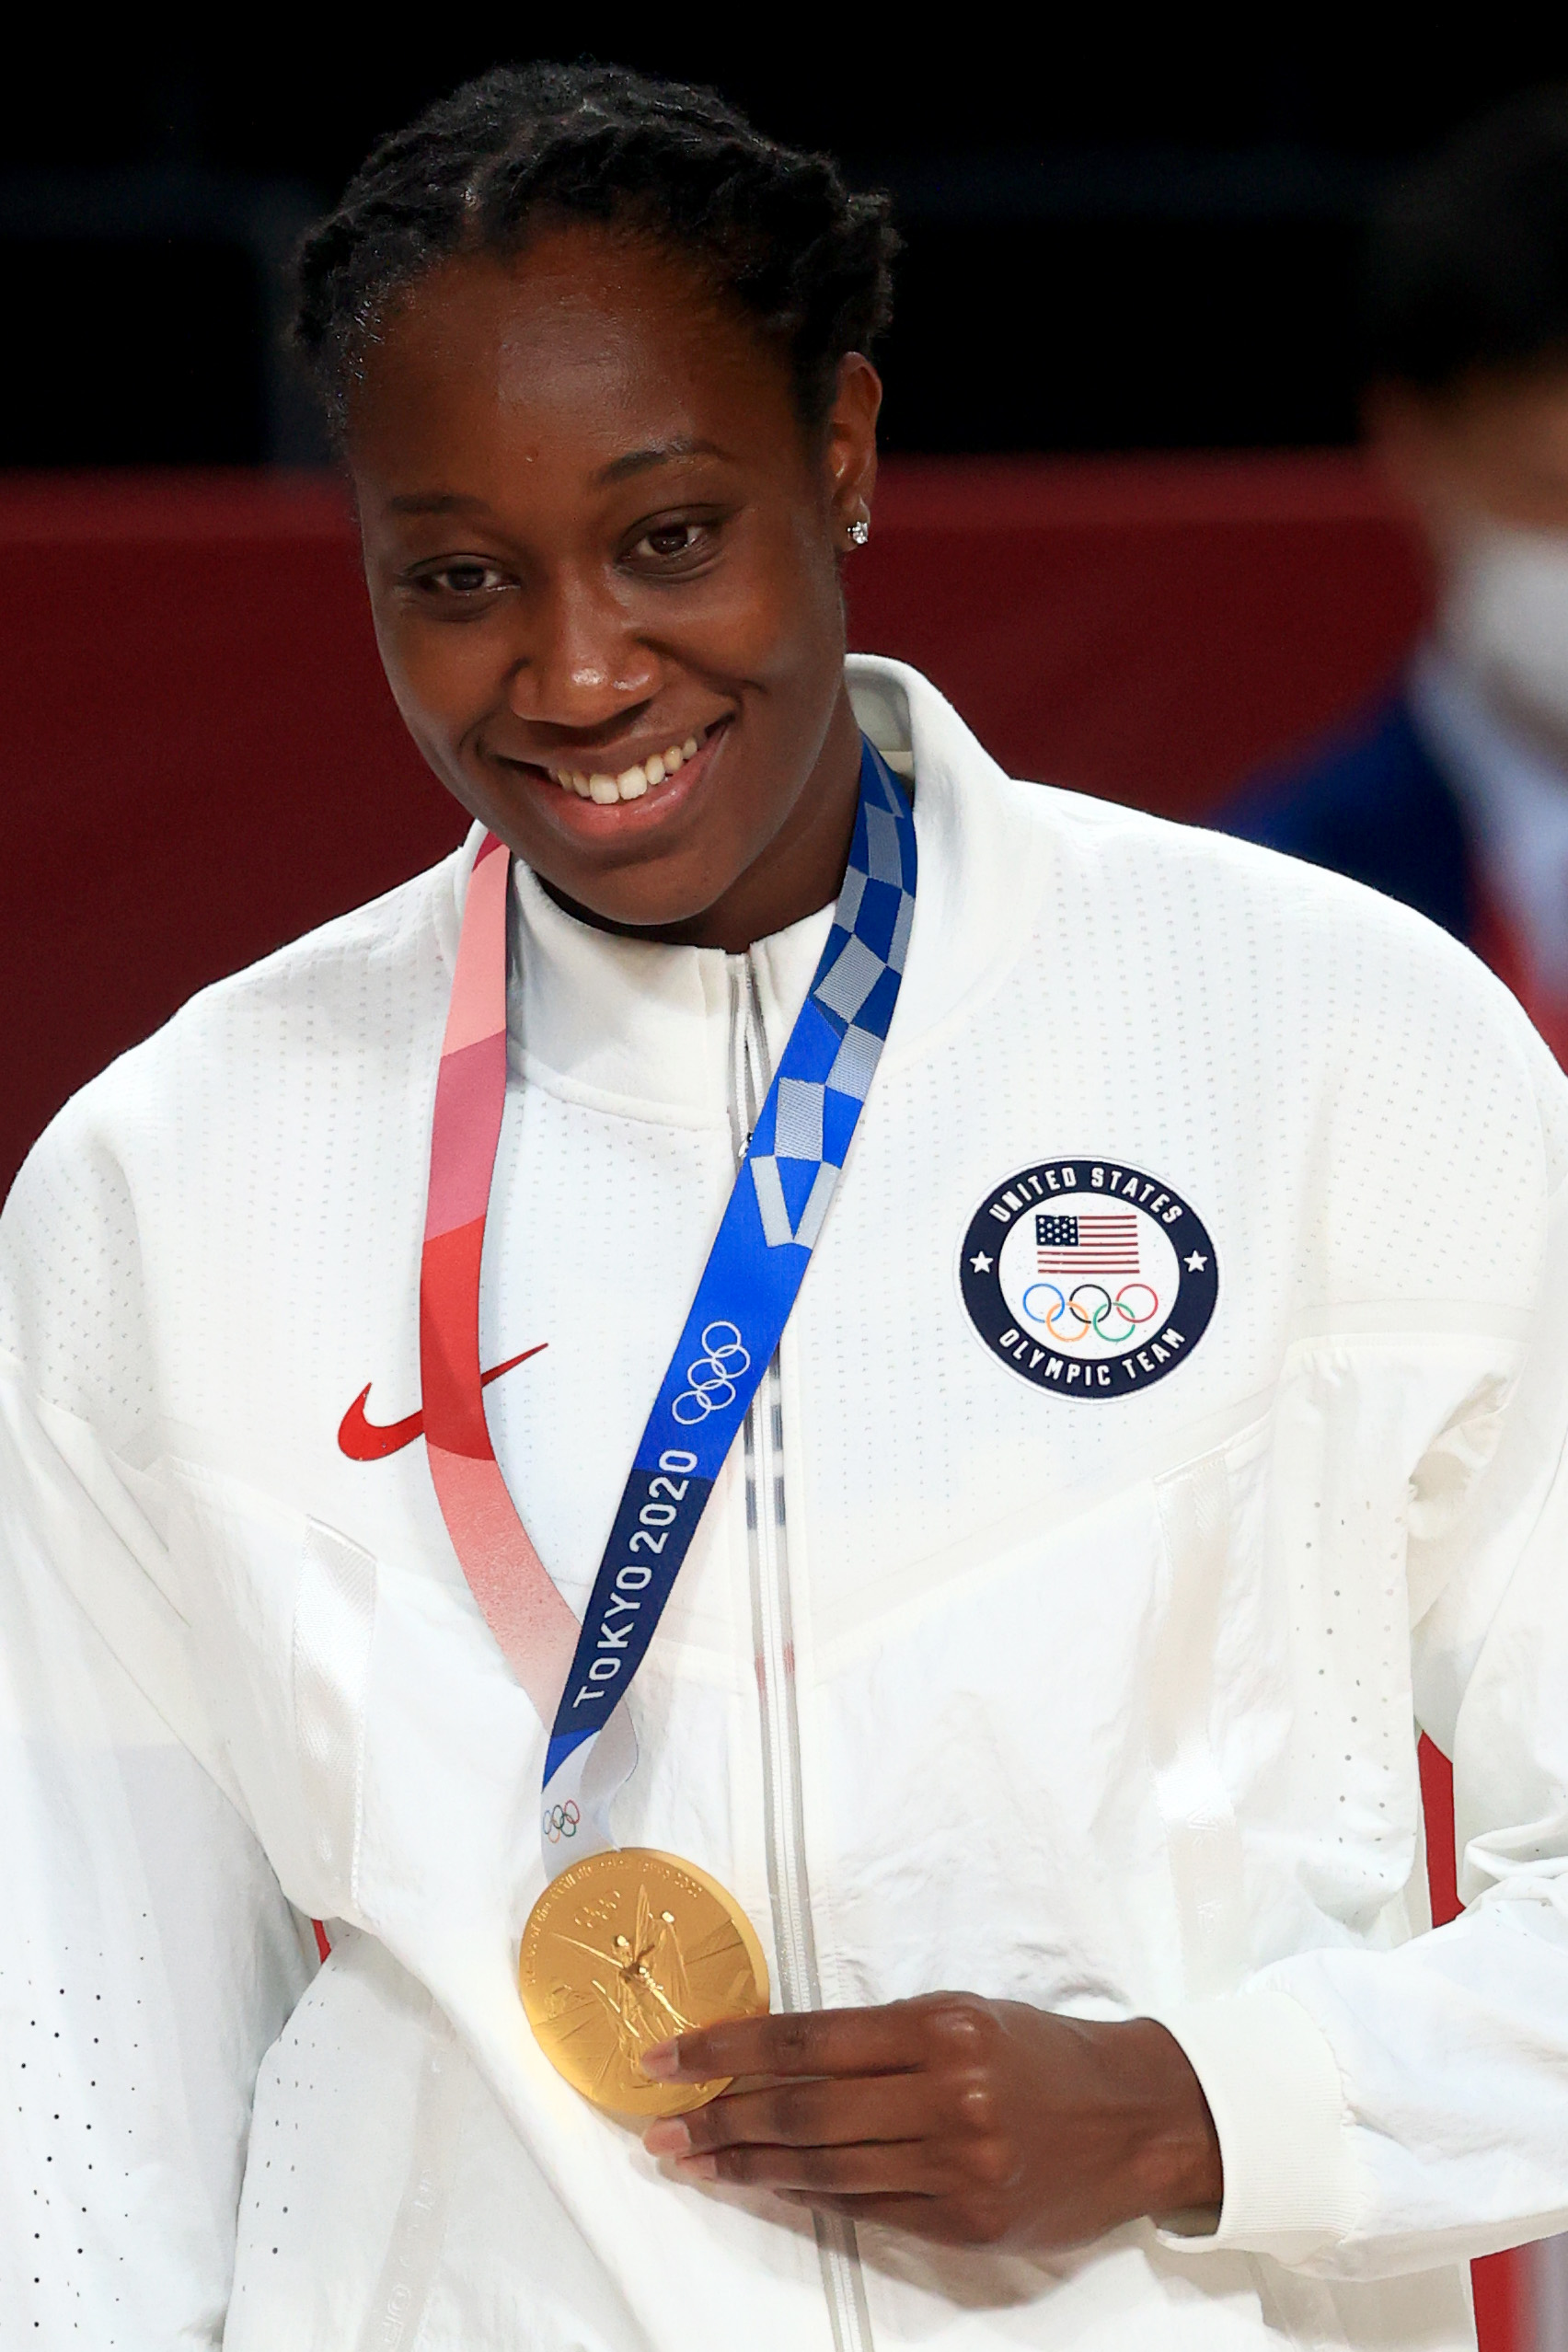 Women’s Basketball Medal Ceremony - Olympics: Day 16